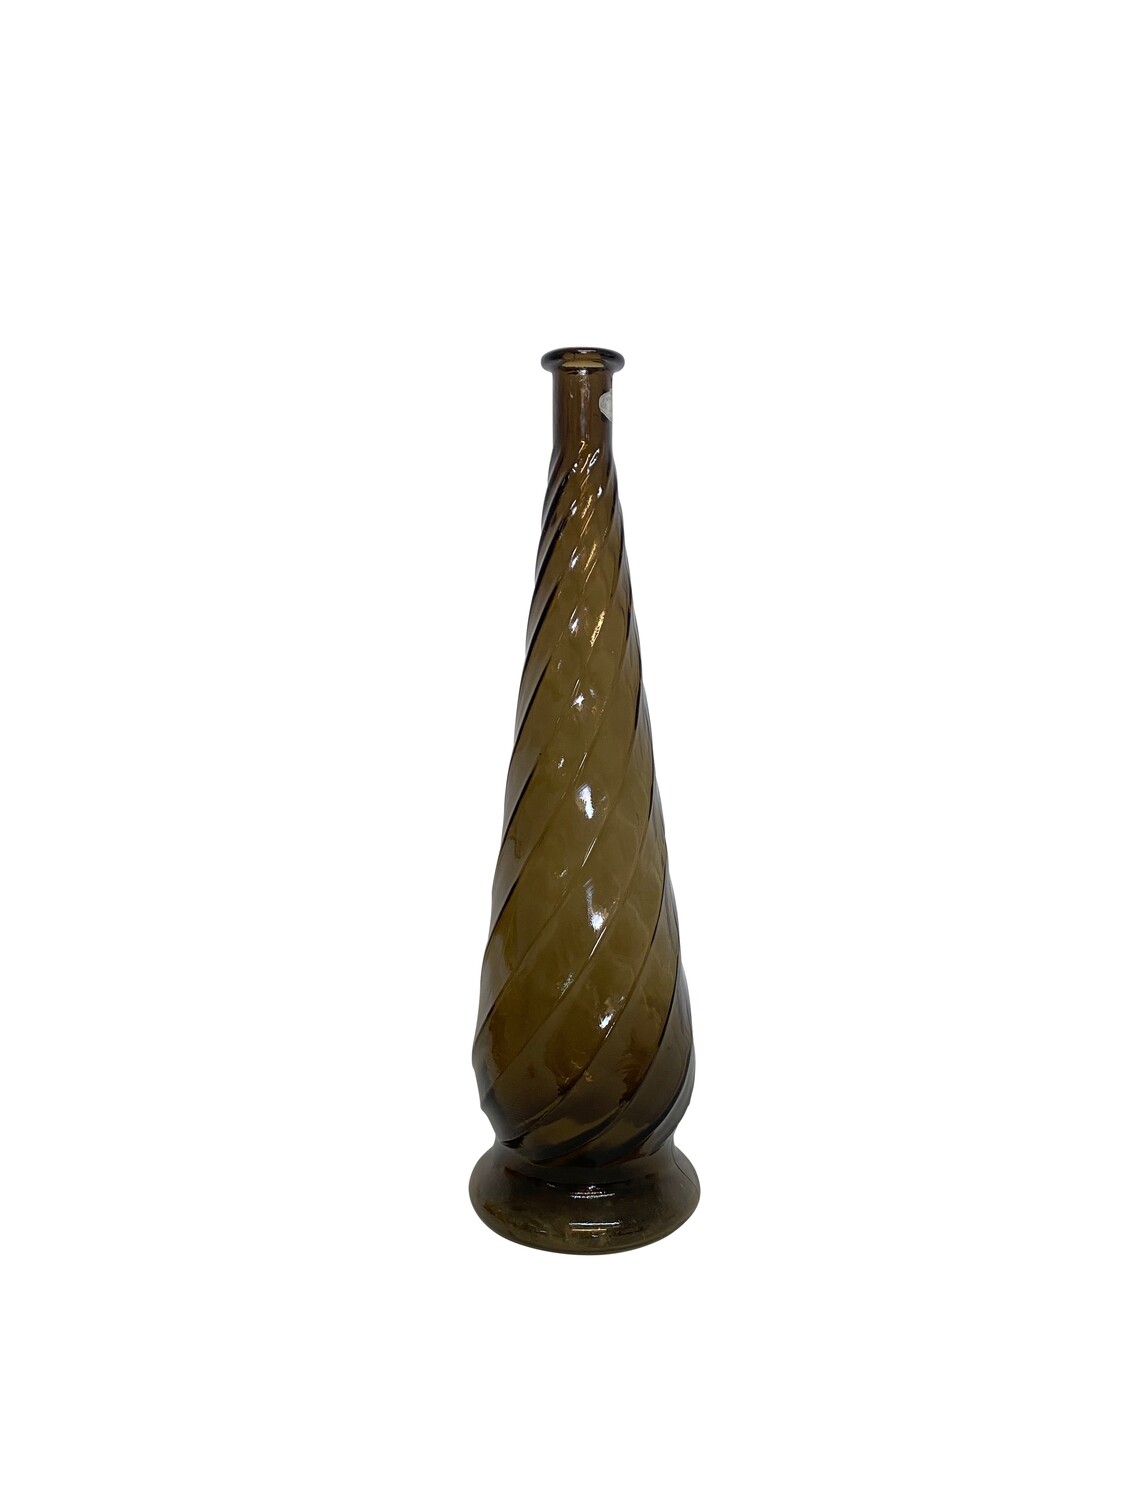 Monumental Swirled Decanter Made in Italy